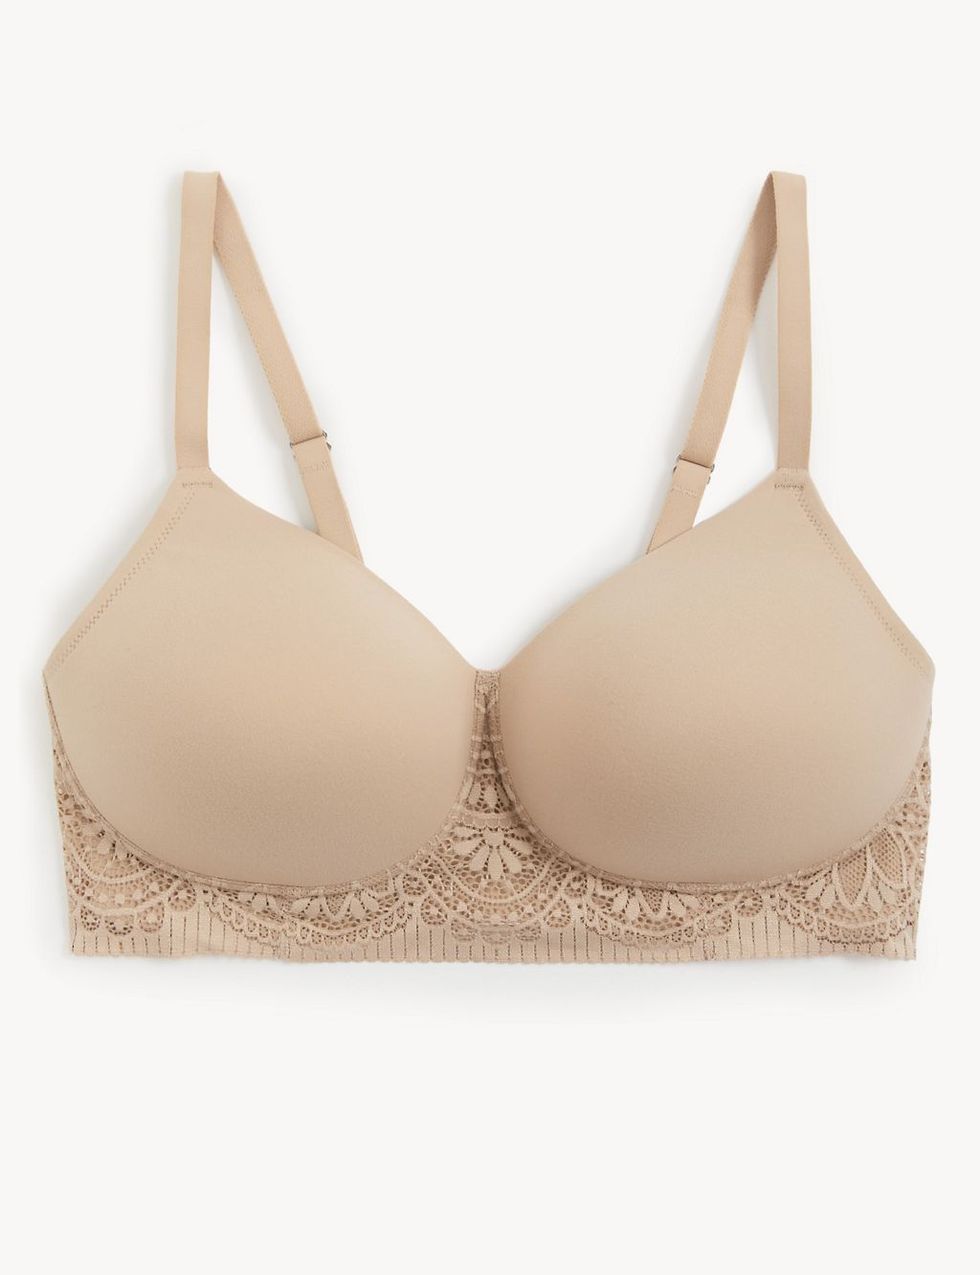 NEW! M&S Marks & Spencer white full cup non-wired post surgery bra